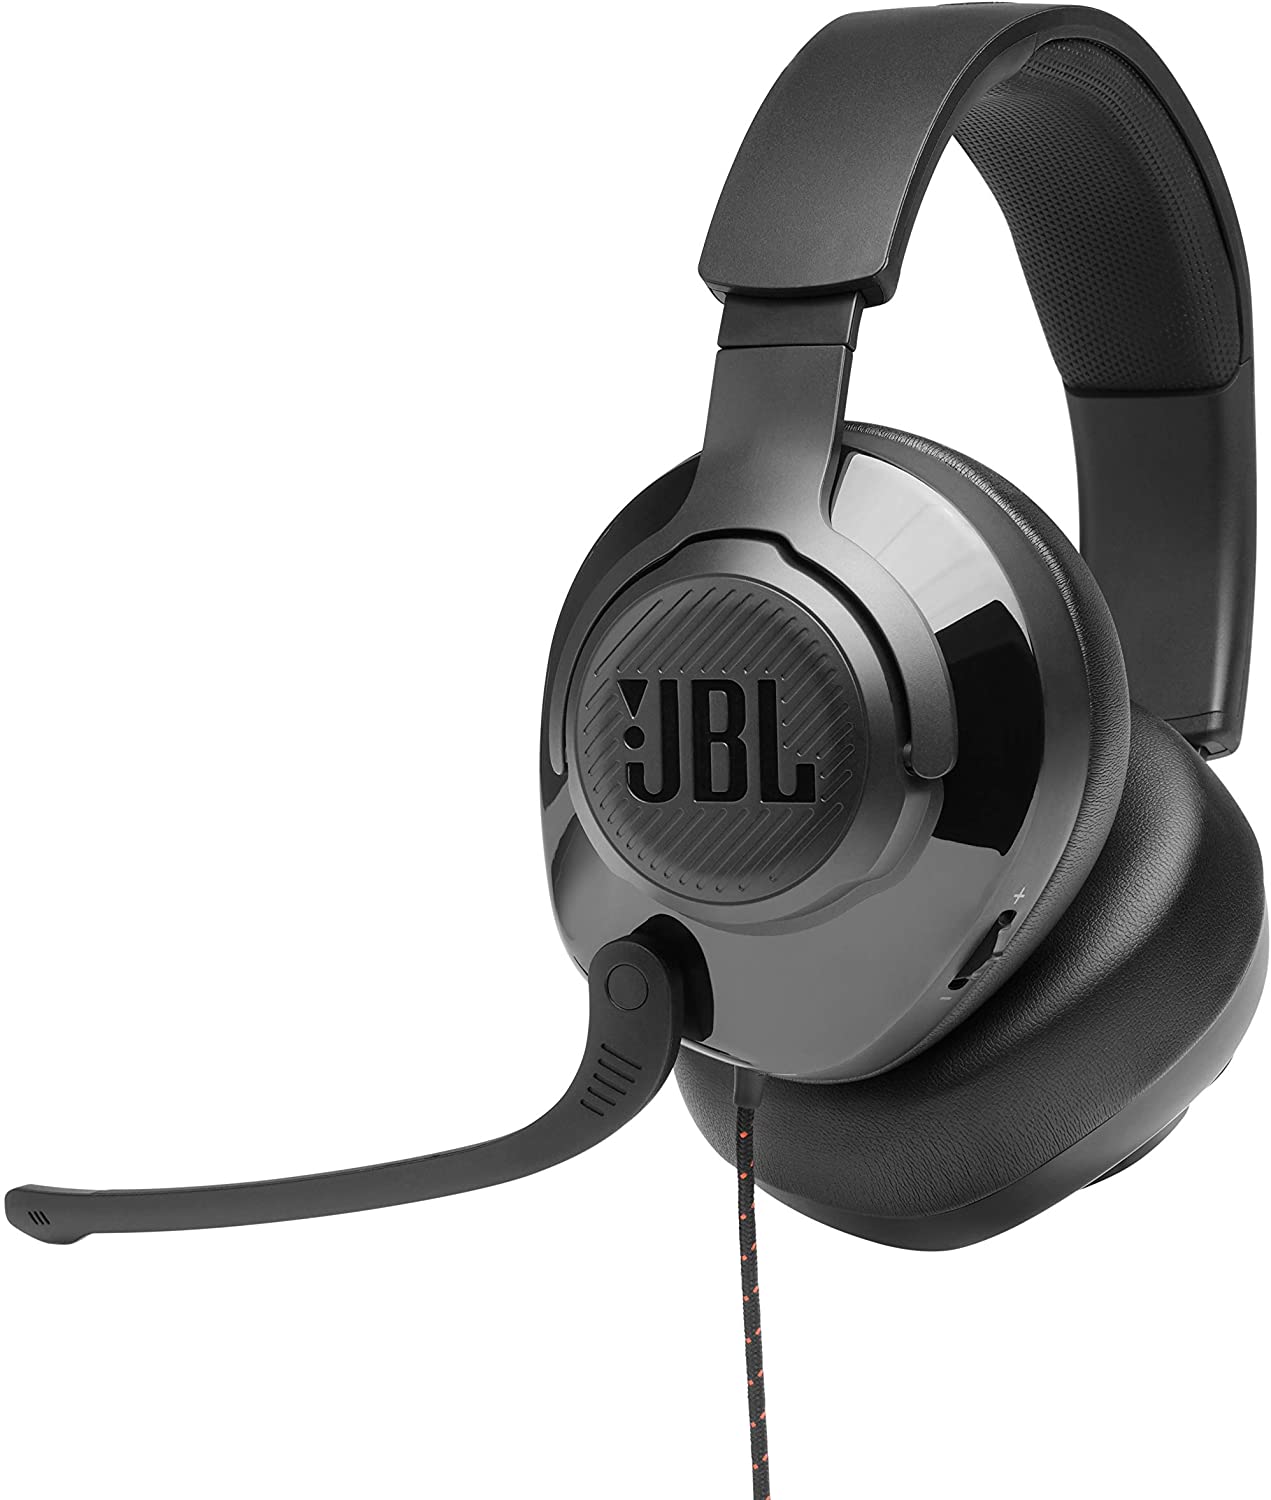 JBL Quantum 300 Wired Over-Ear Gaming Headset, Black